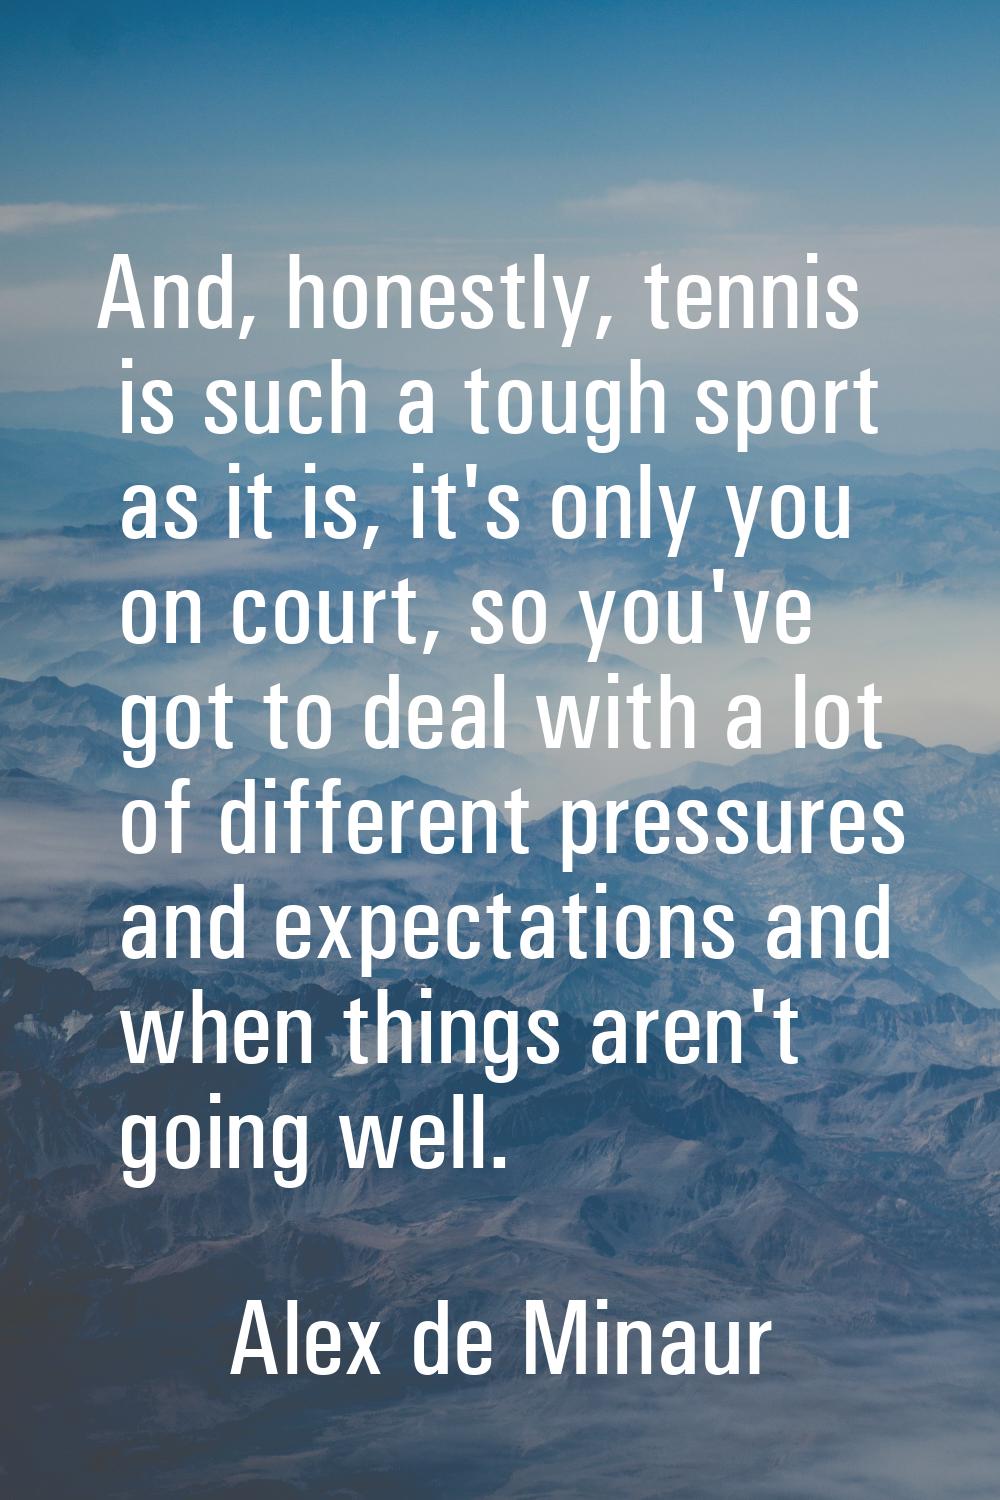 And, honestly, tennis is such a tough sport as it is, it's only you on court, so you've got to deal